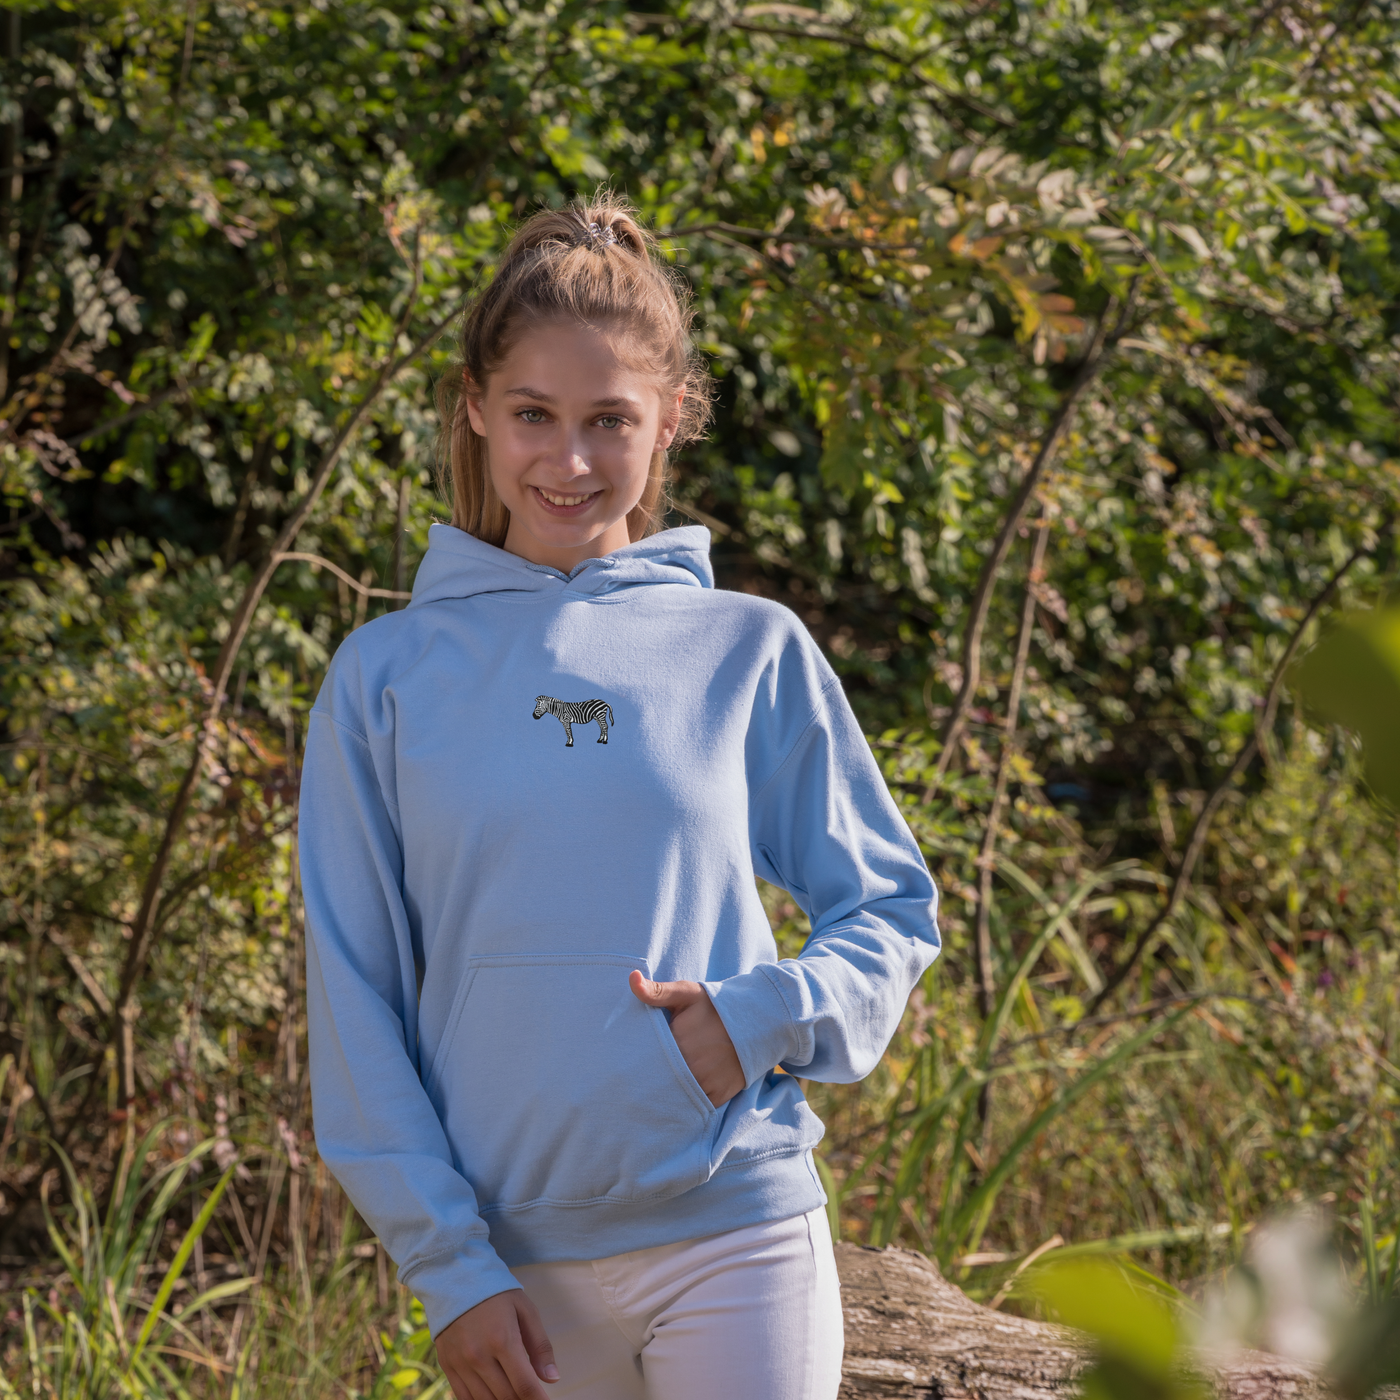 Bobby's Planet Women's Embroidered Zebra Hoodie from African Animals Collection in Light Blue Color#color_light-blue